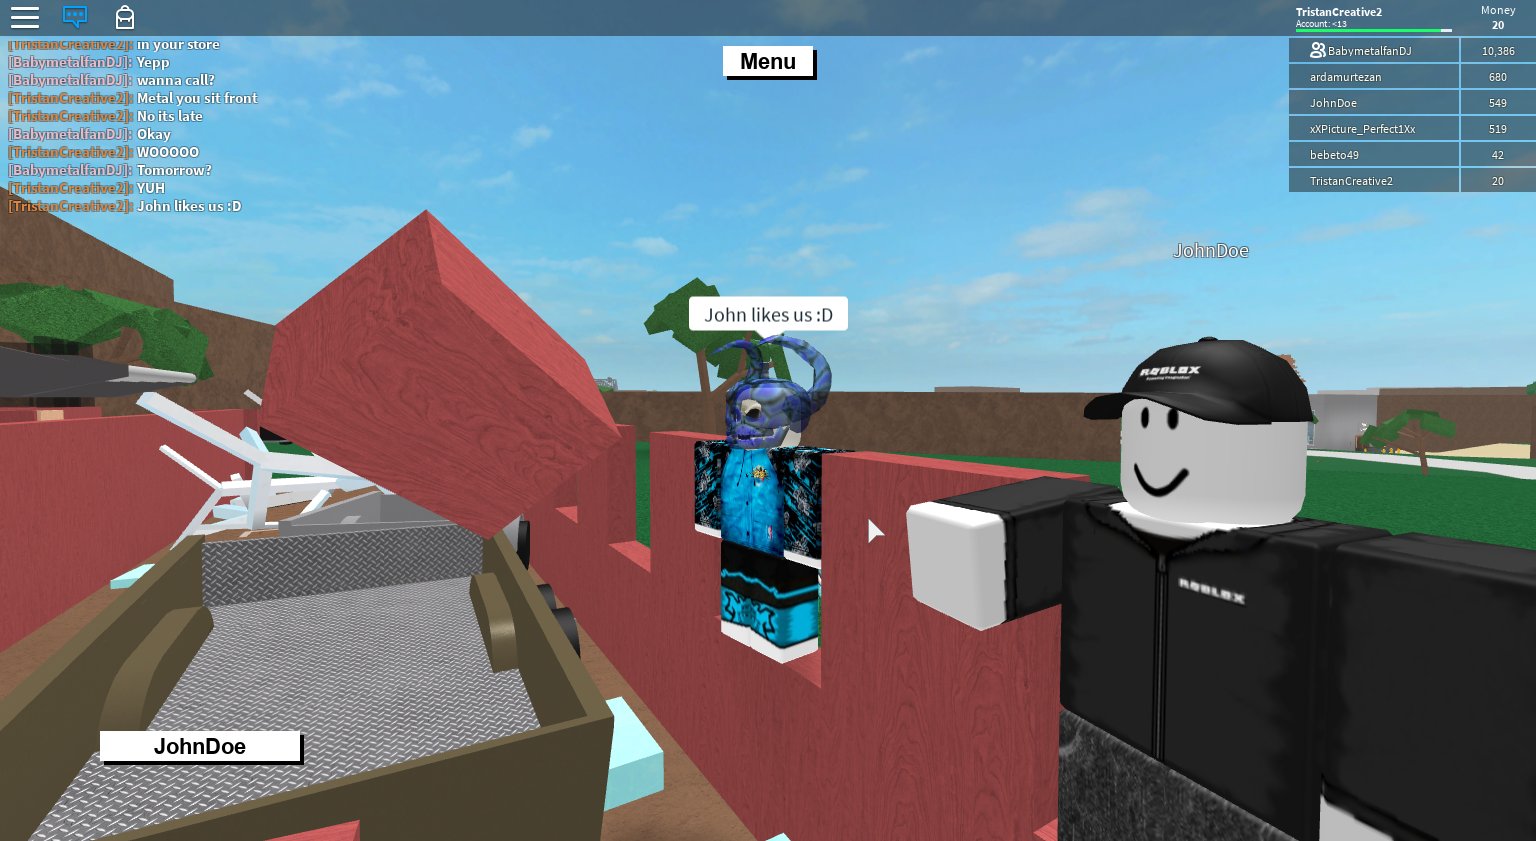 Tristancreative On Twitter I Met The God Himself Johndoe This One Has No Spaces 0 0 Real Or Fake Is It The Same Im With Baby Metal Fan Dj As Well In Lumber - roblox lumber tycoon 2 its john doe